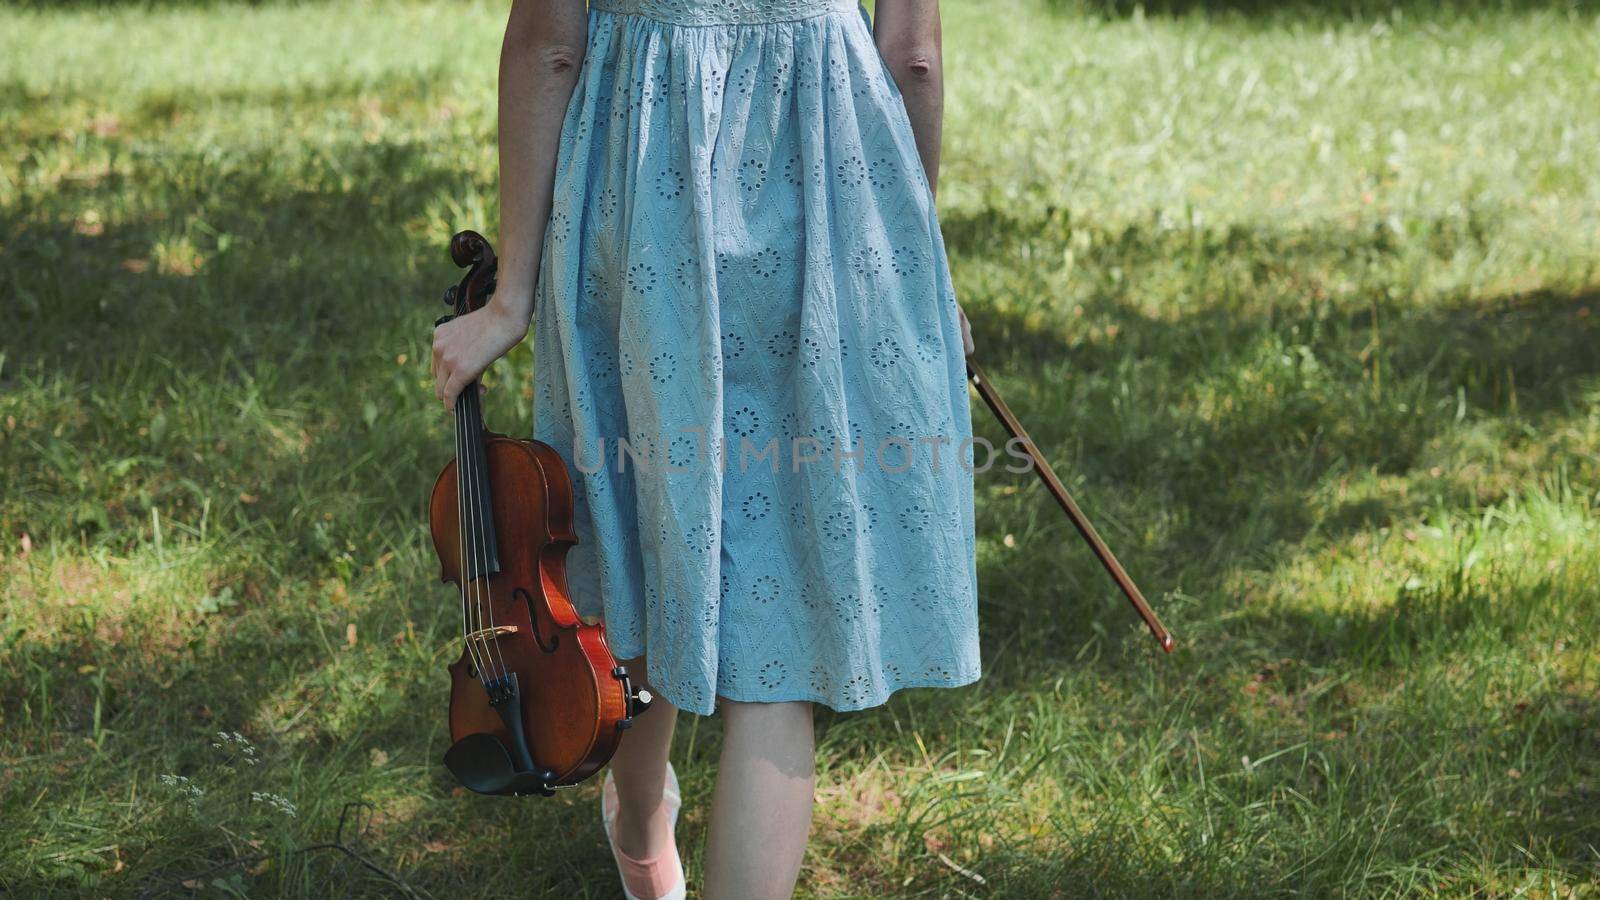 A girl in a dress walks with a violin in a city park. by DovidPro